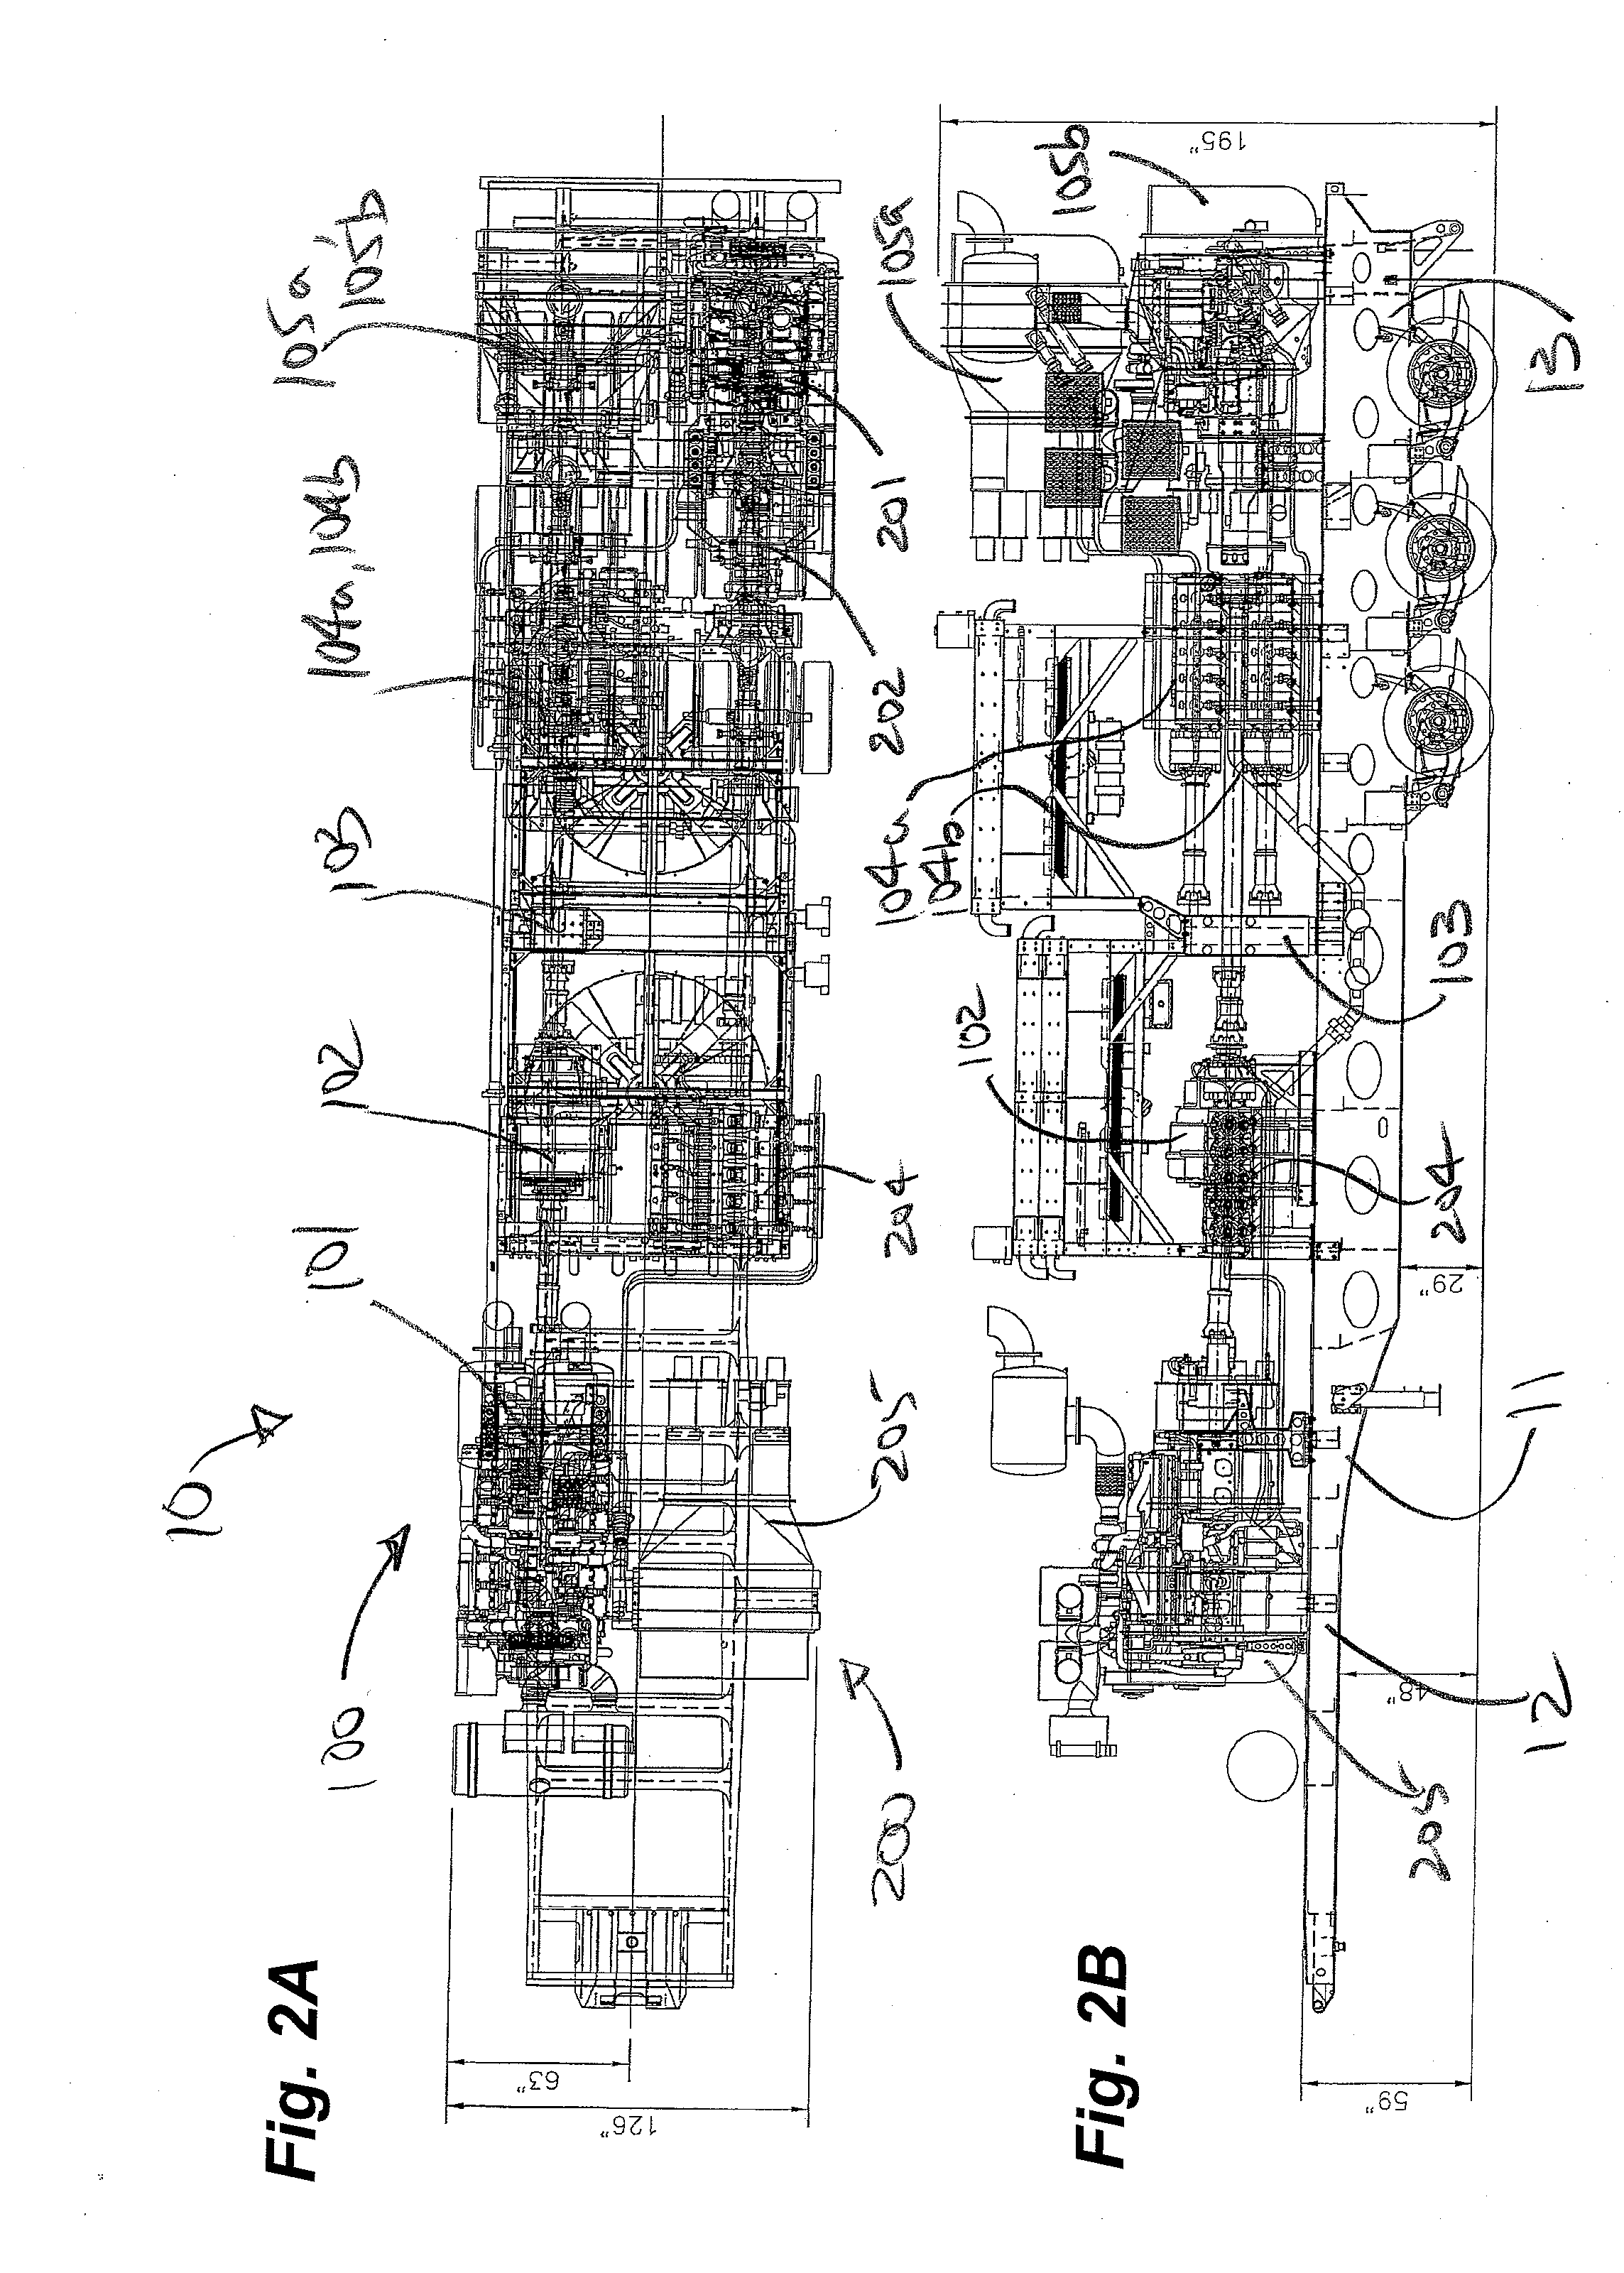 Transportable pumping unit and method of fracturing formations